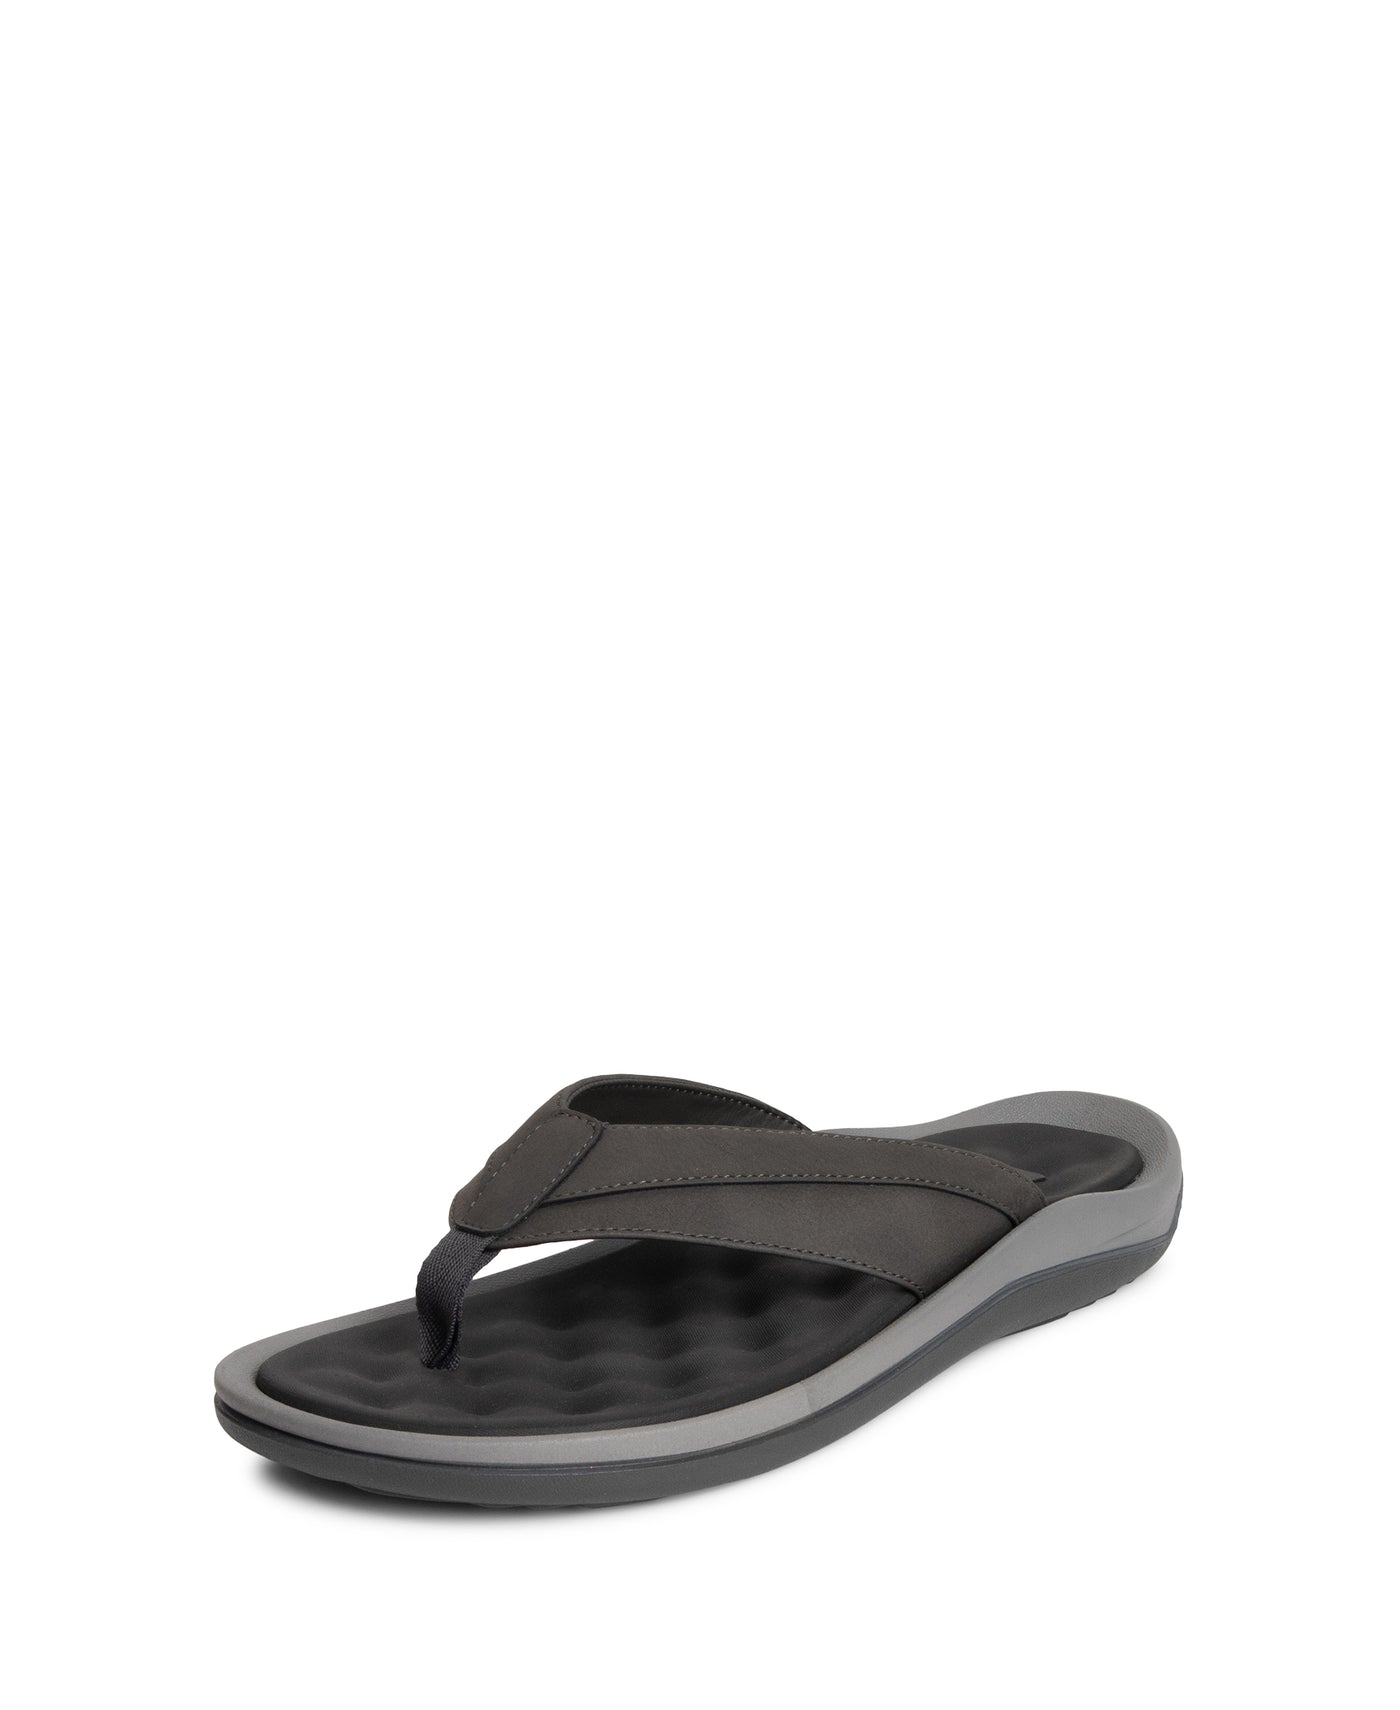 Unlisted by Kenneth Cole Men's Quinn Flip Flop